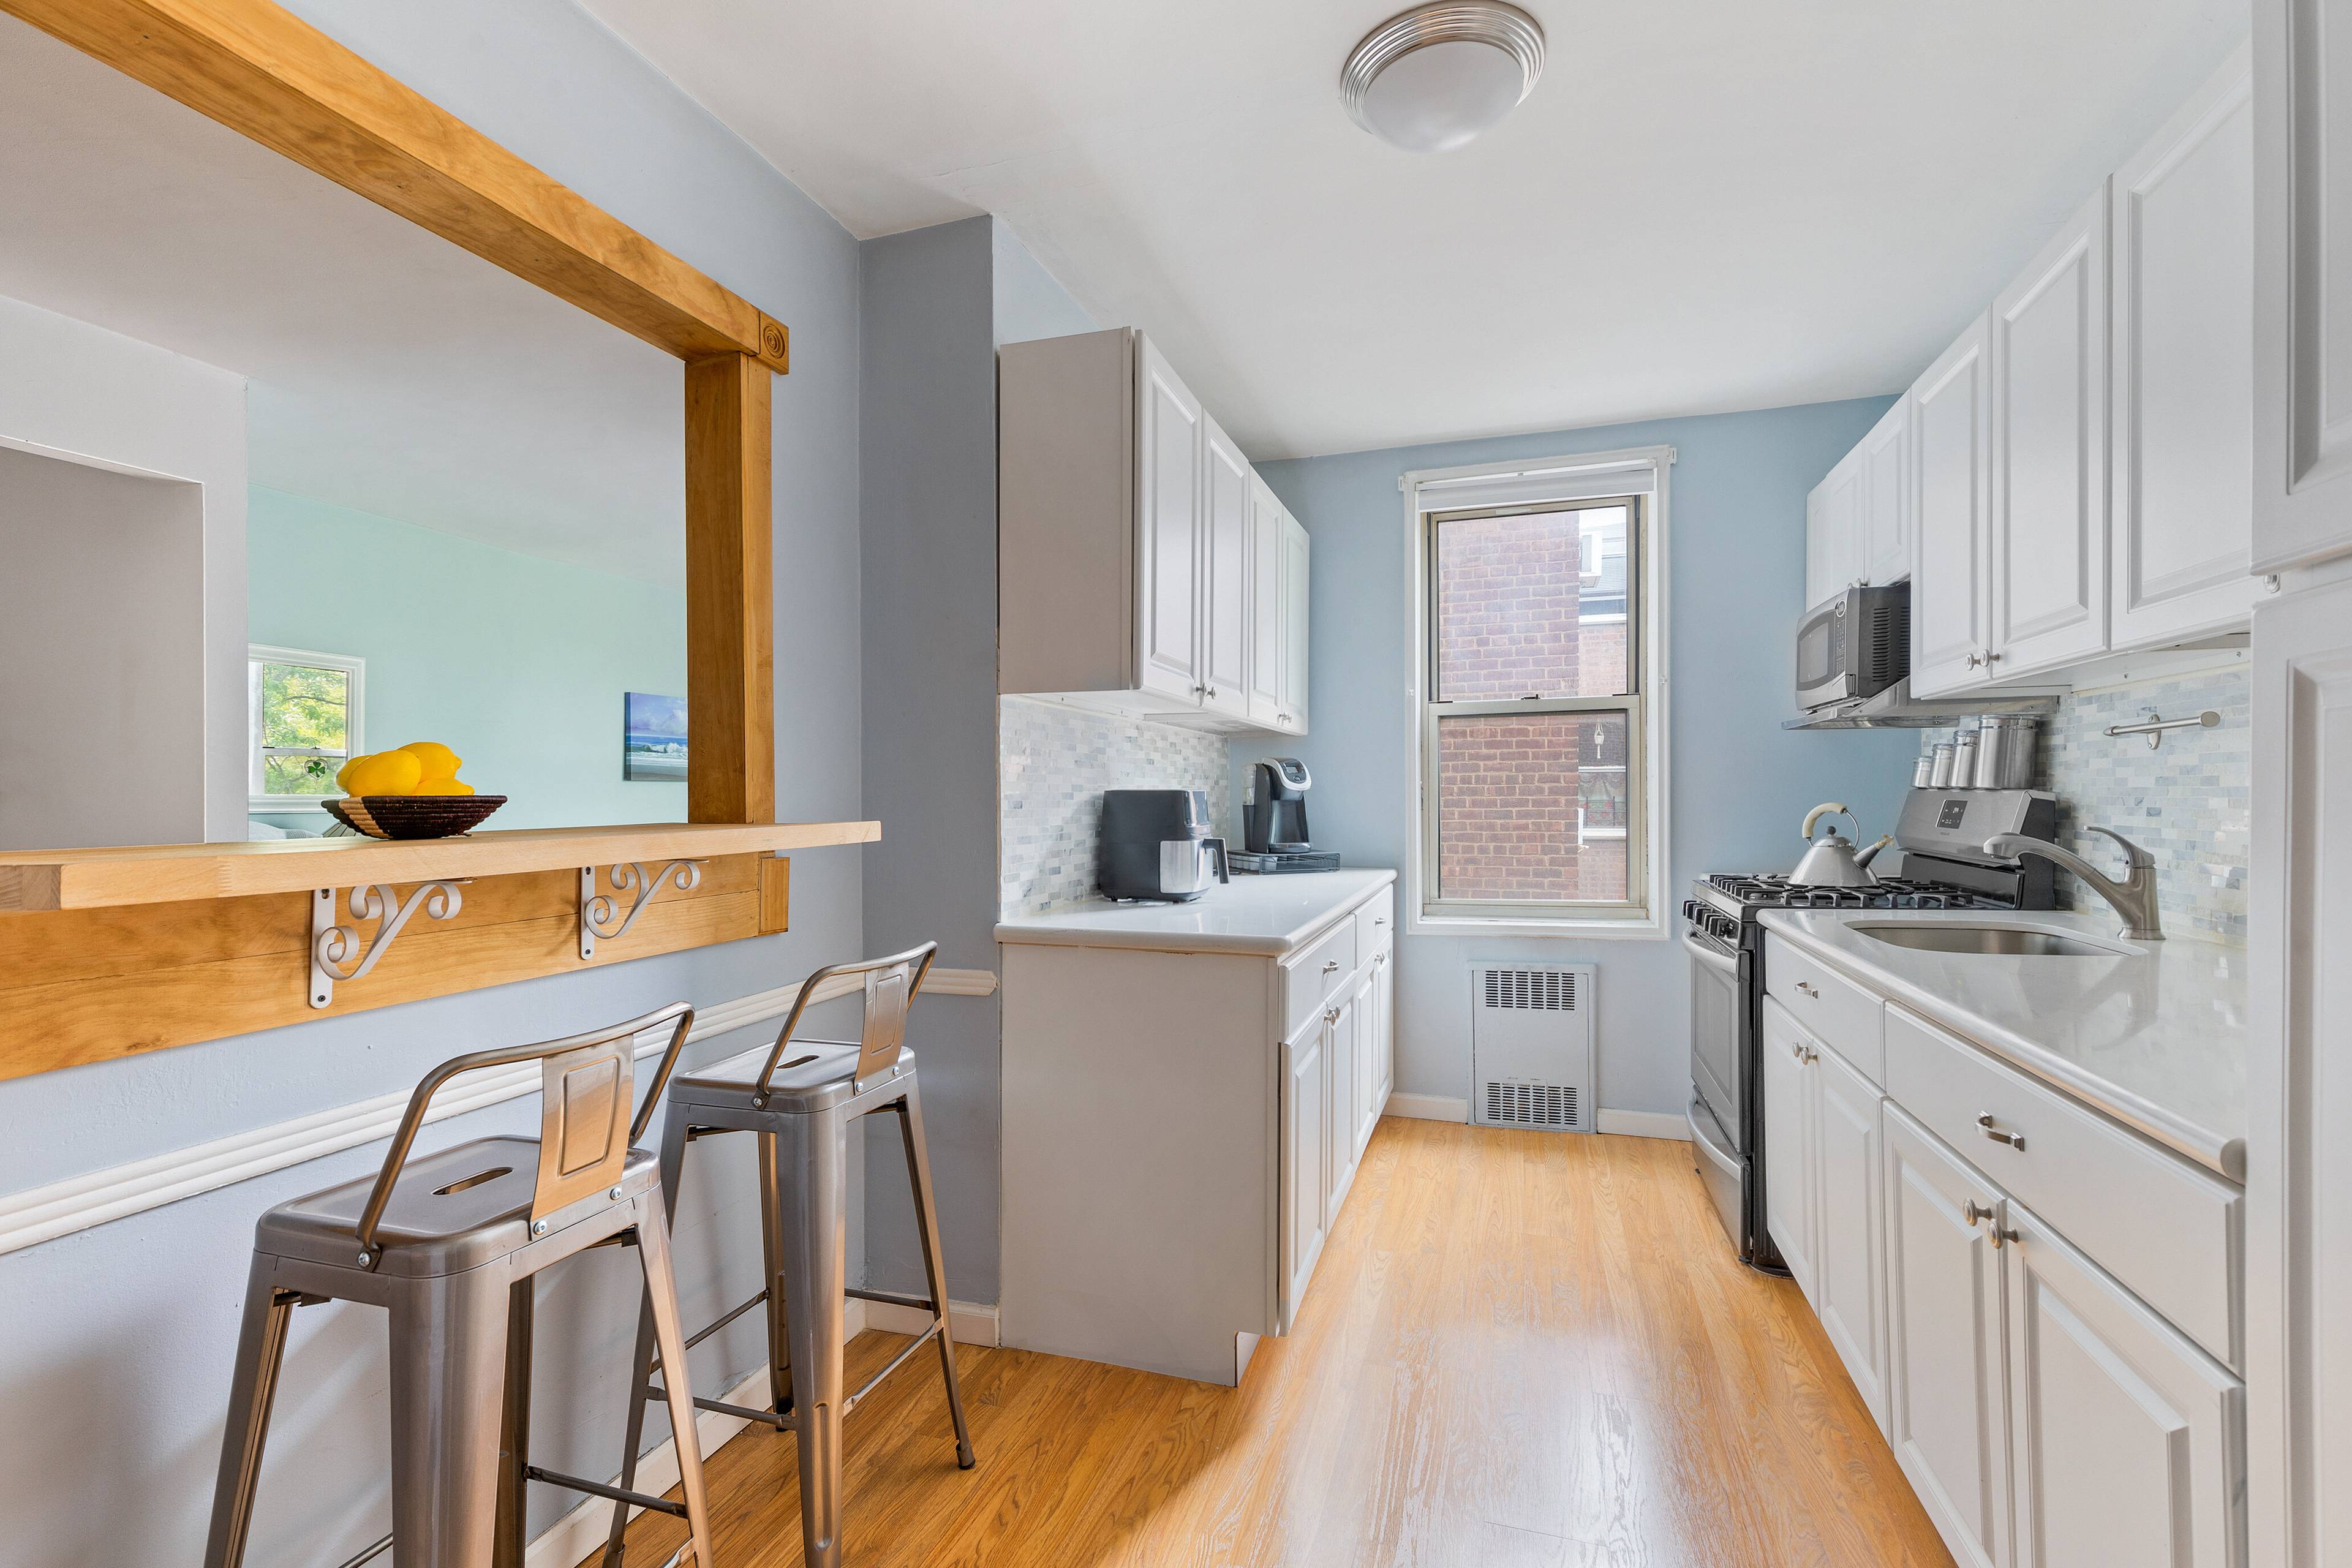 Introducing 221 McDonald Your Gateway to the Serene Heart of Windsor Terrace Nestled within the picturesque Windsor Terrace, 221 McDonald stands as an impeccably maintained co op building, exclusively occupied ...